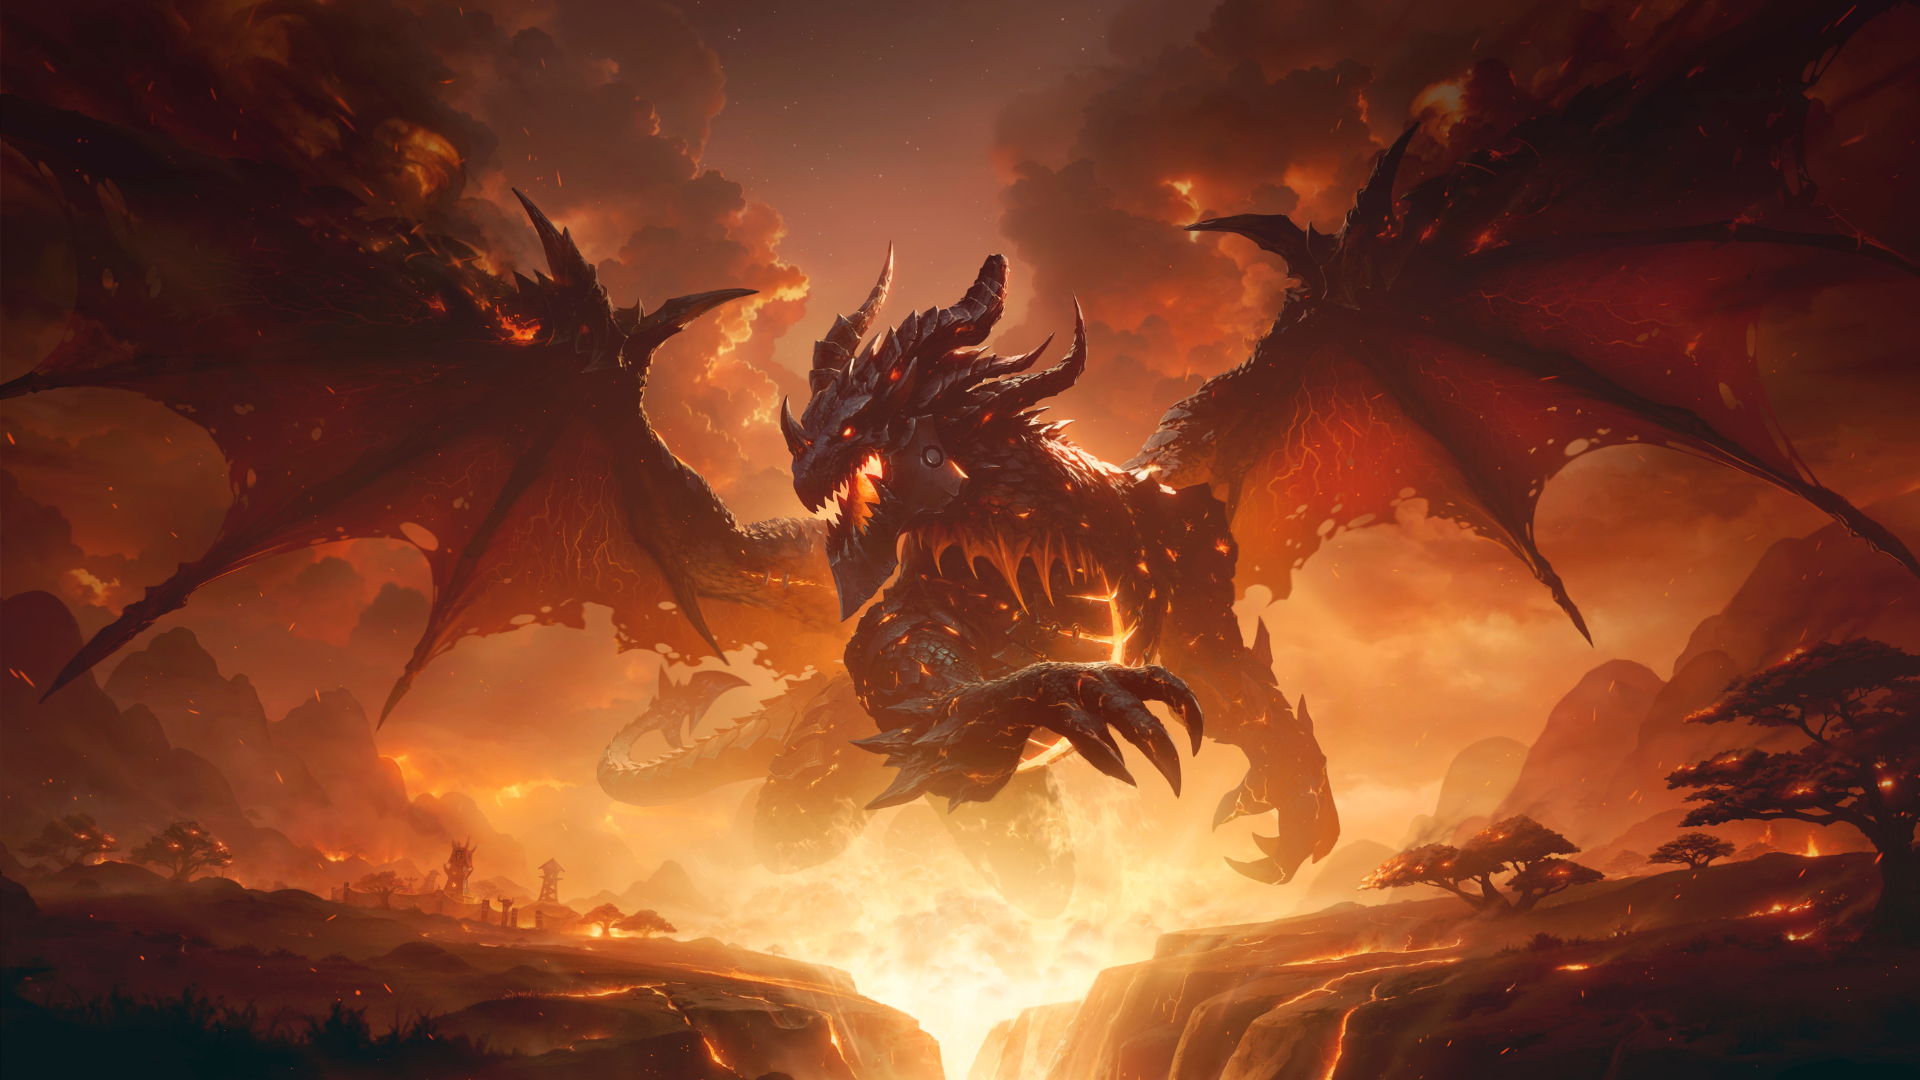 World of Warcraft Classic key art for the Cataclysm expansion, showing the Dragon Aspect Deathwing bringing an apocalypse of flame to the world of Azeroth